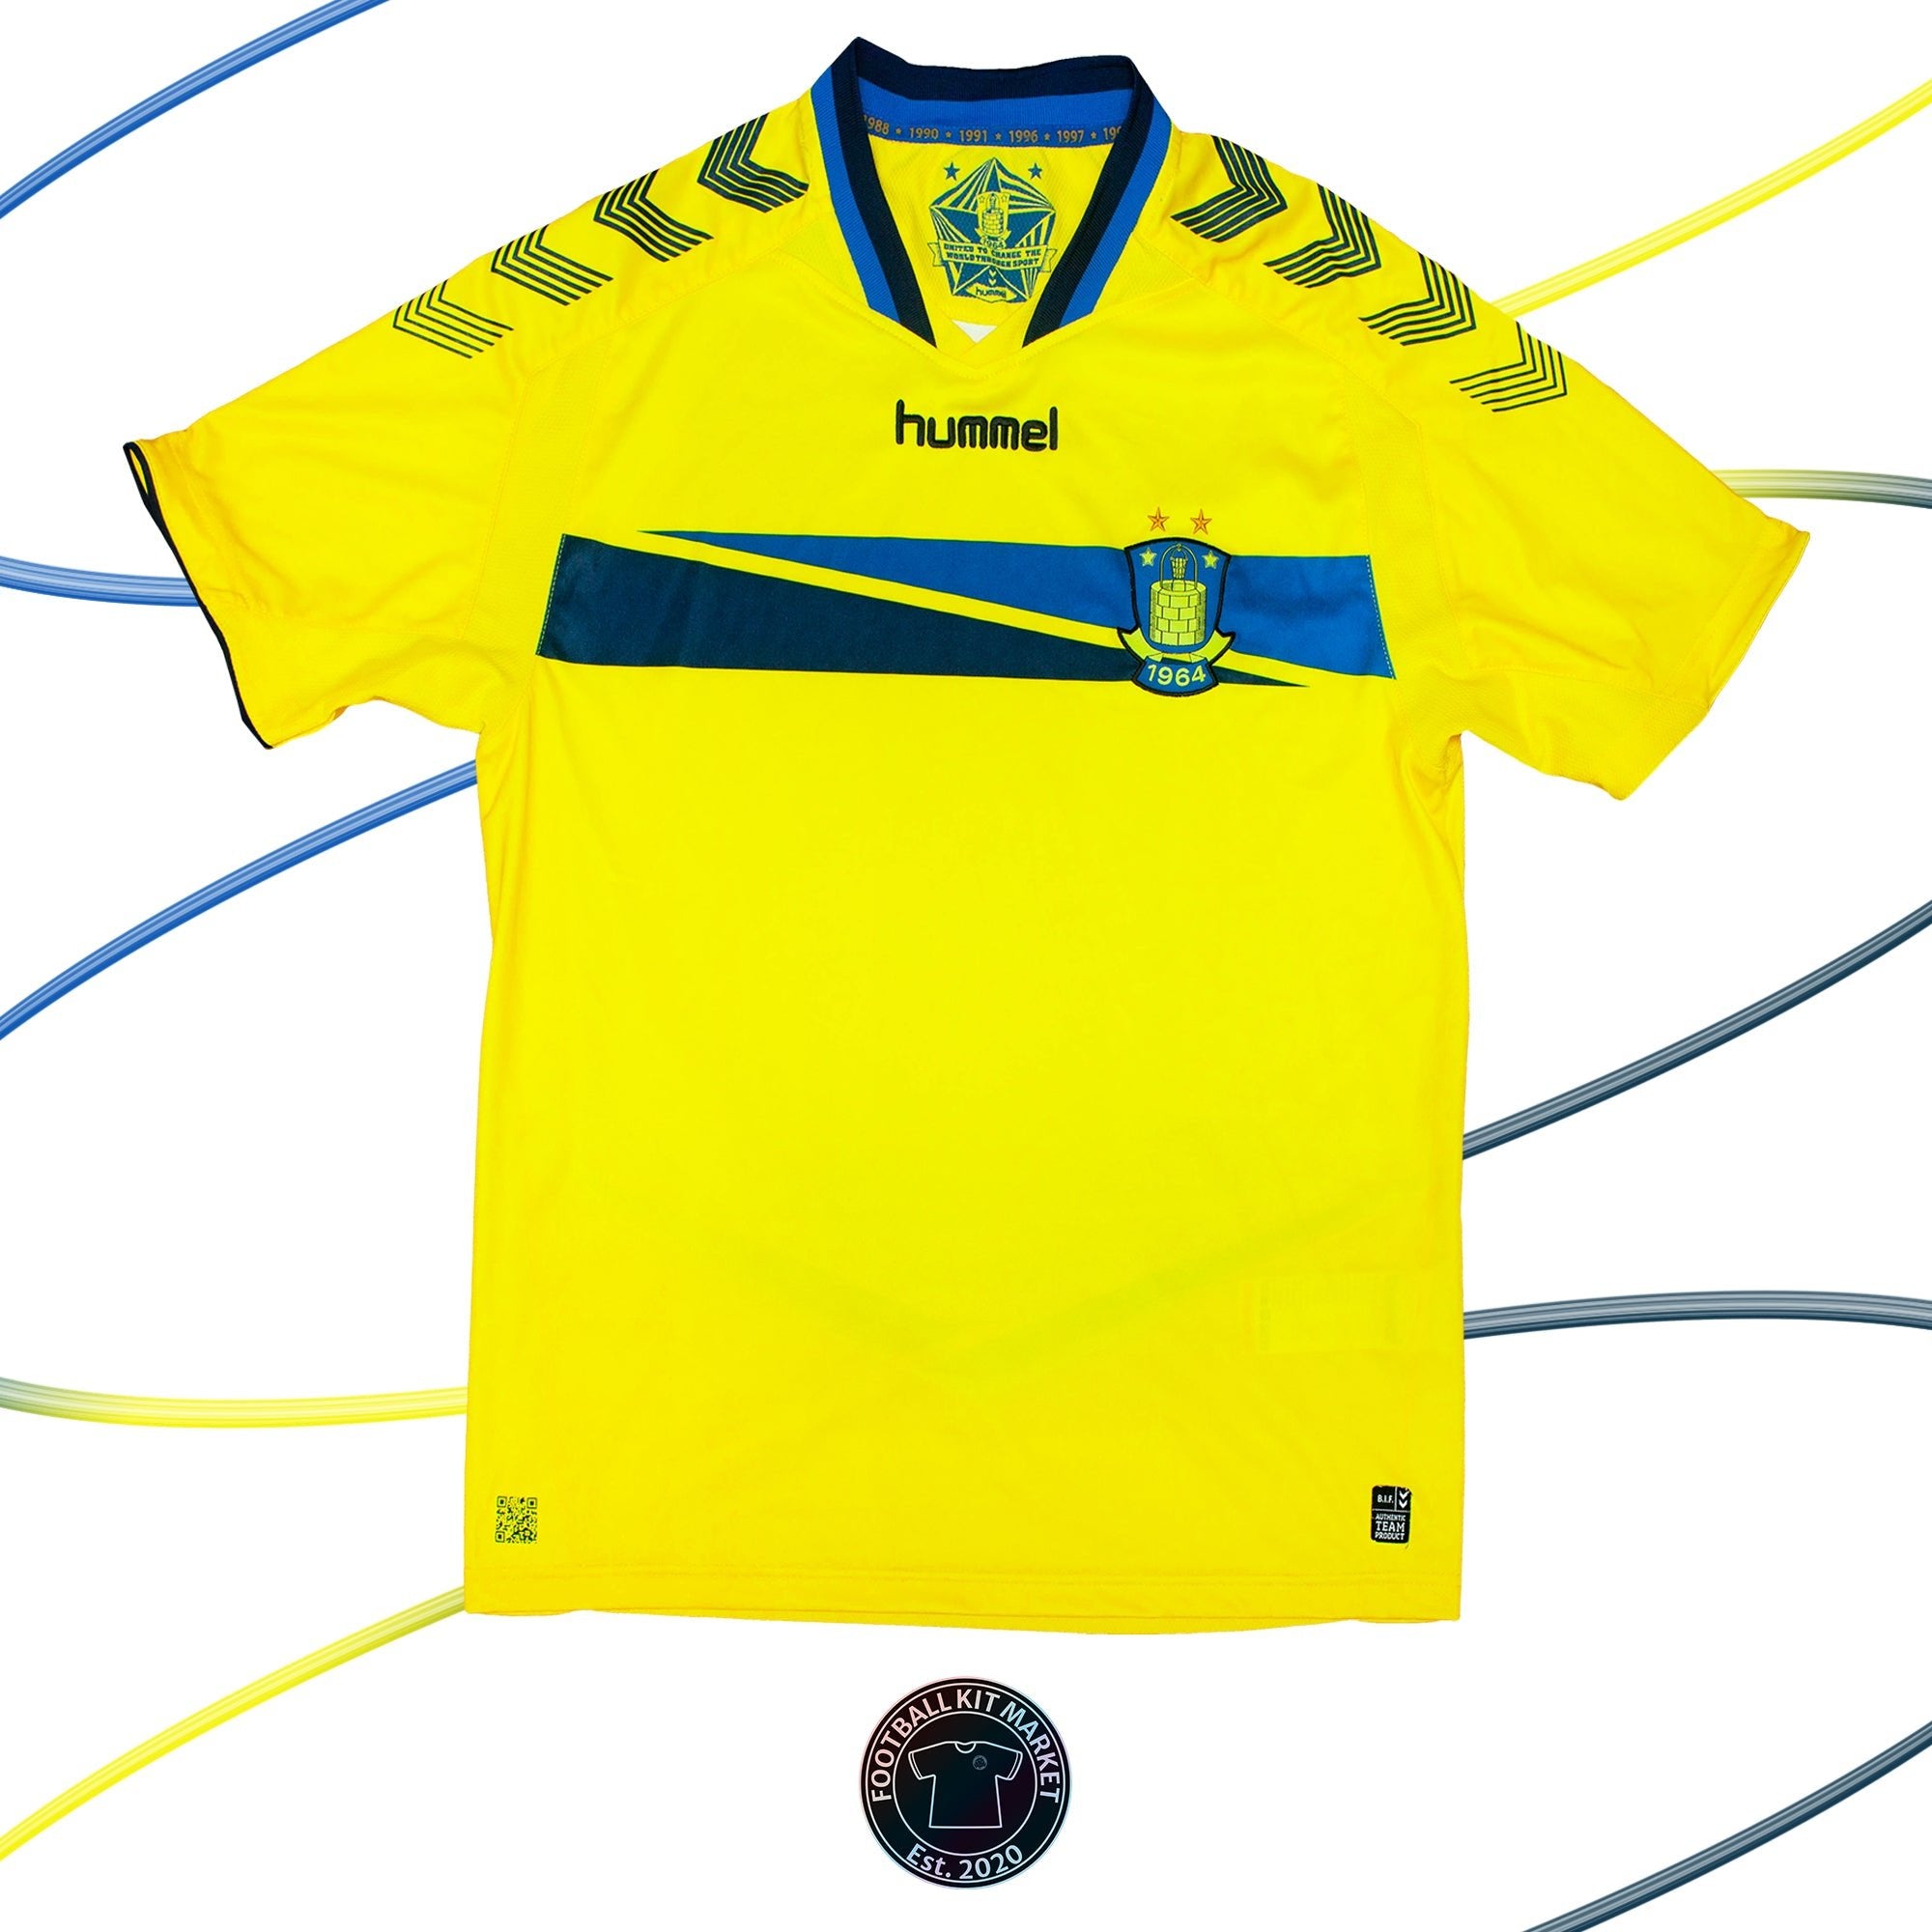 Genuine BRONDBY Home (2014-2015) - HUMMEL (L) - Product Image from Football Kit Market